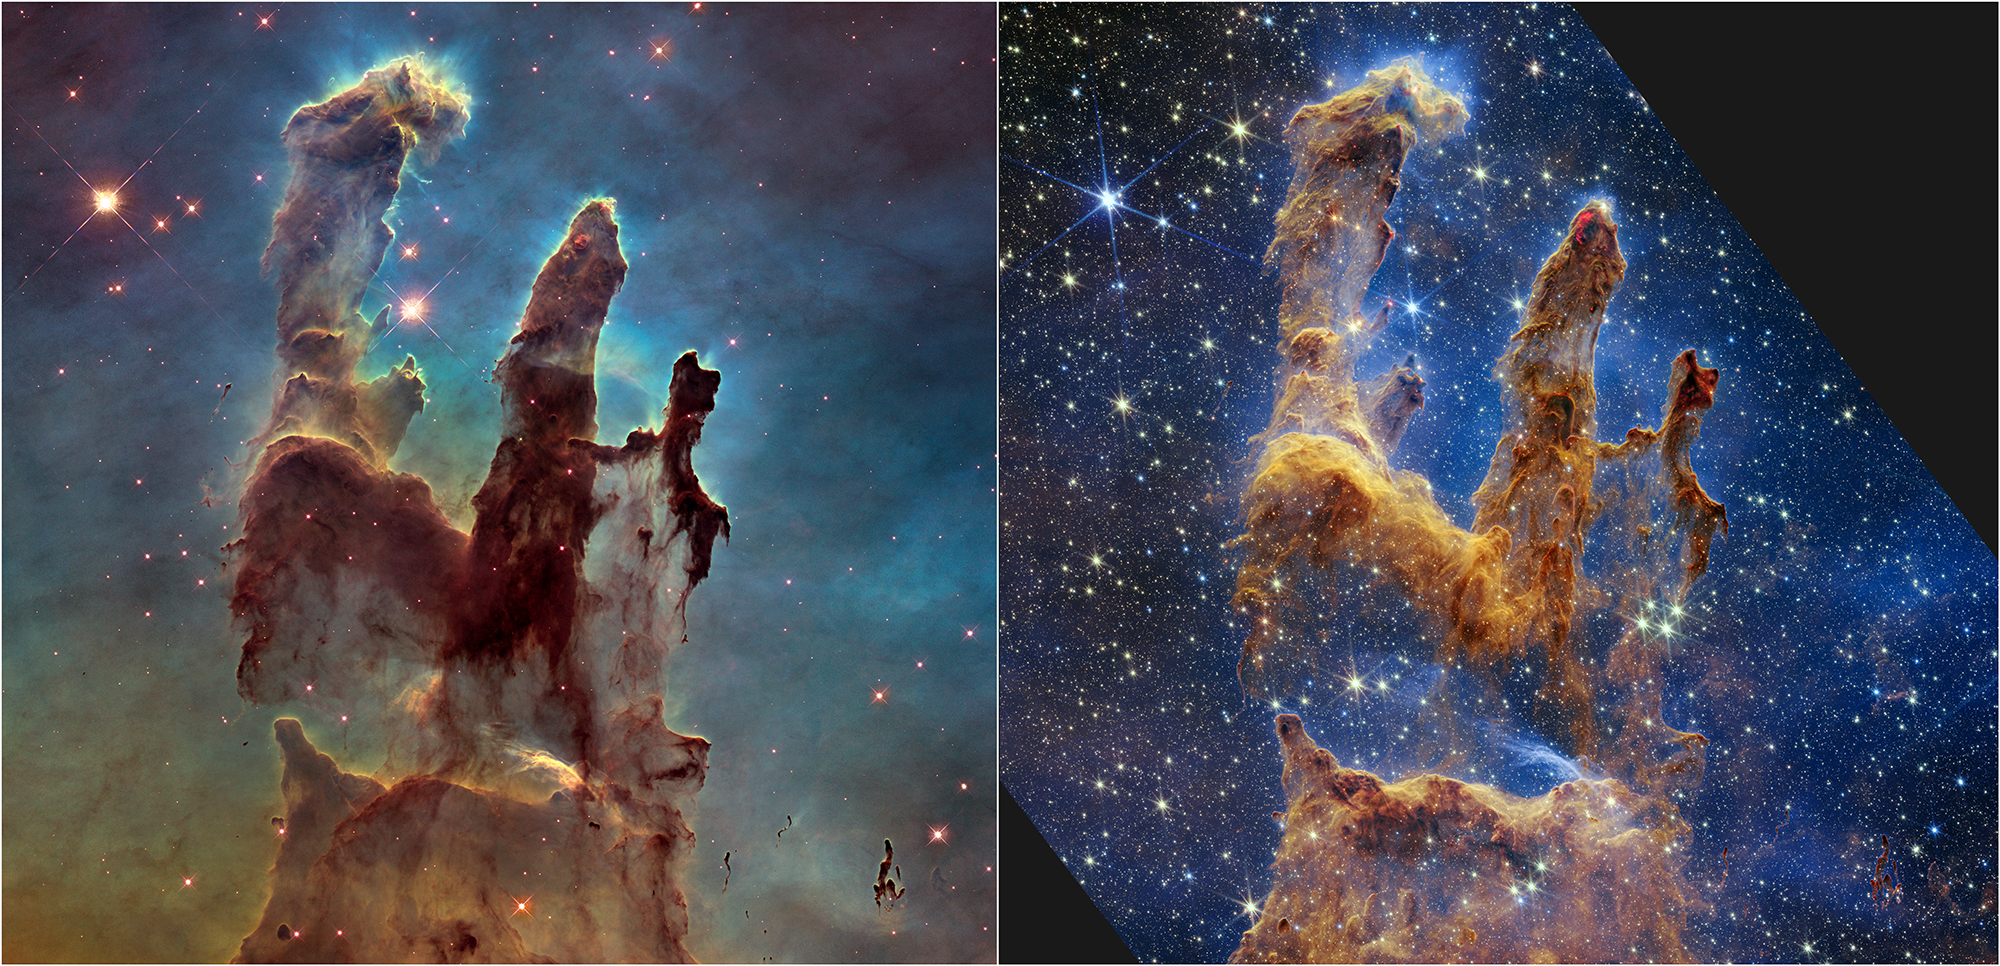 Images of the stellar nursery known as the Pillars of Creation taken by the Hubble Space Telescope (left) and the James Webb Space Telescope (right)